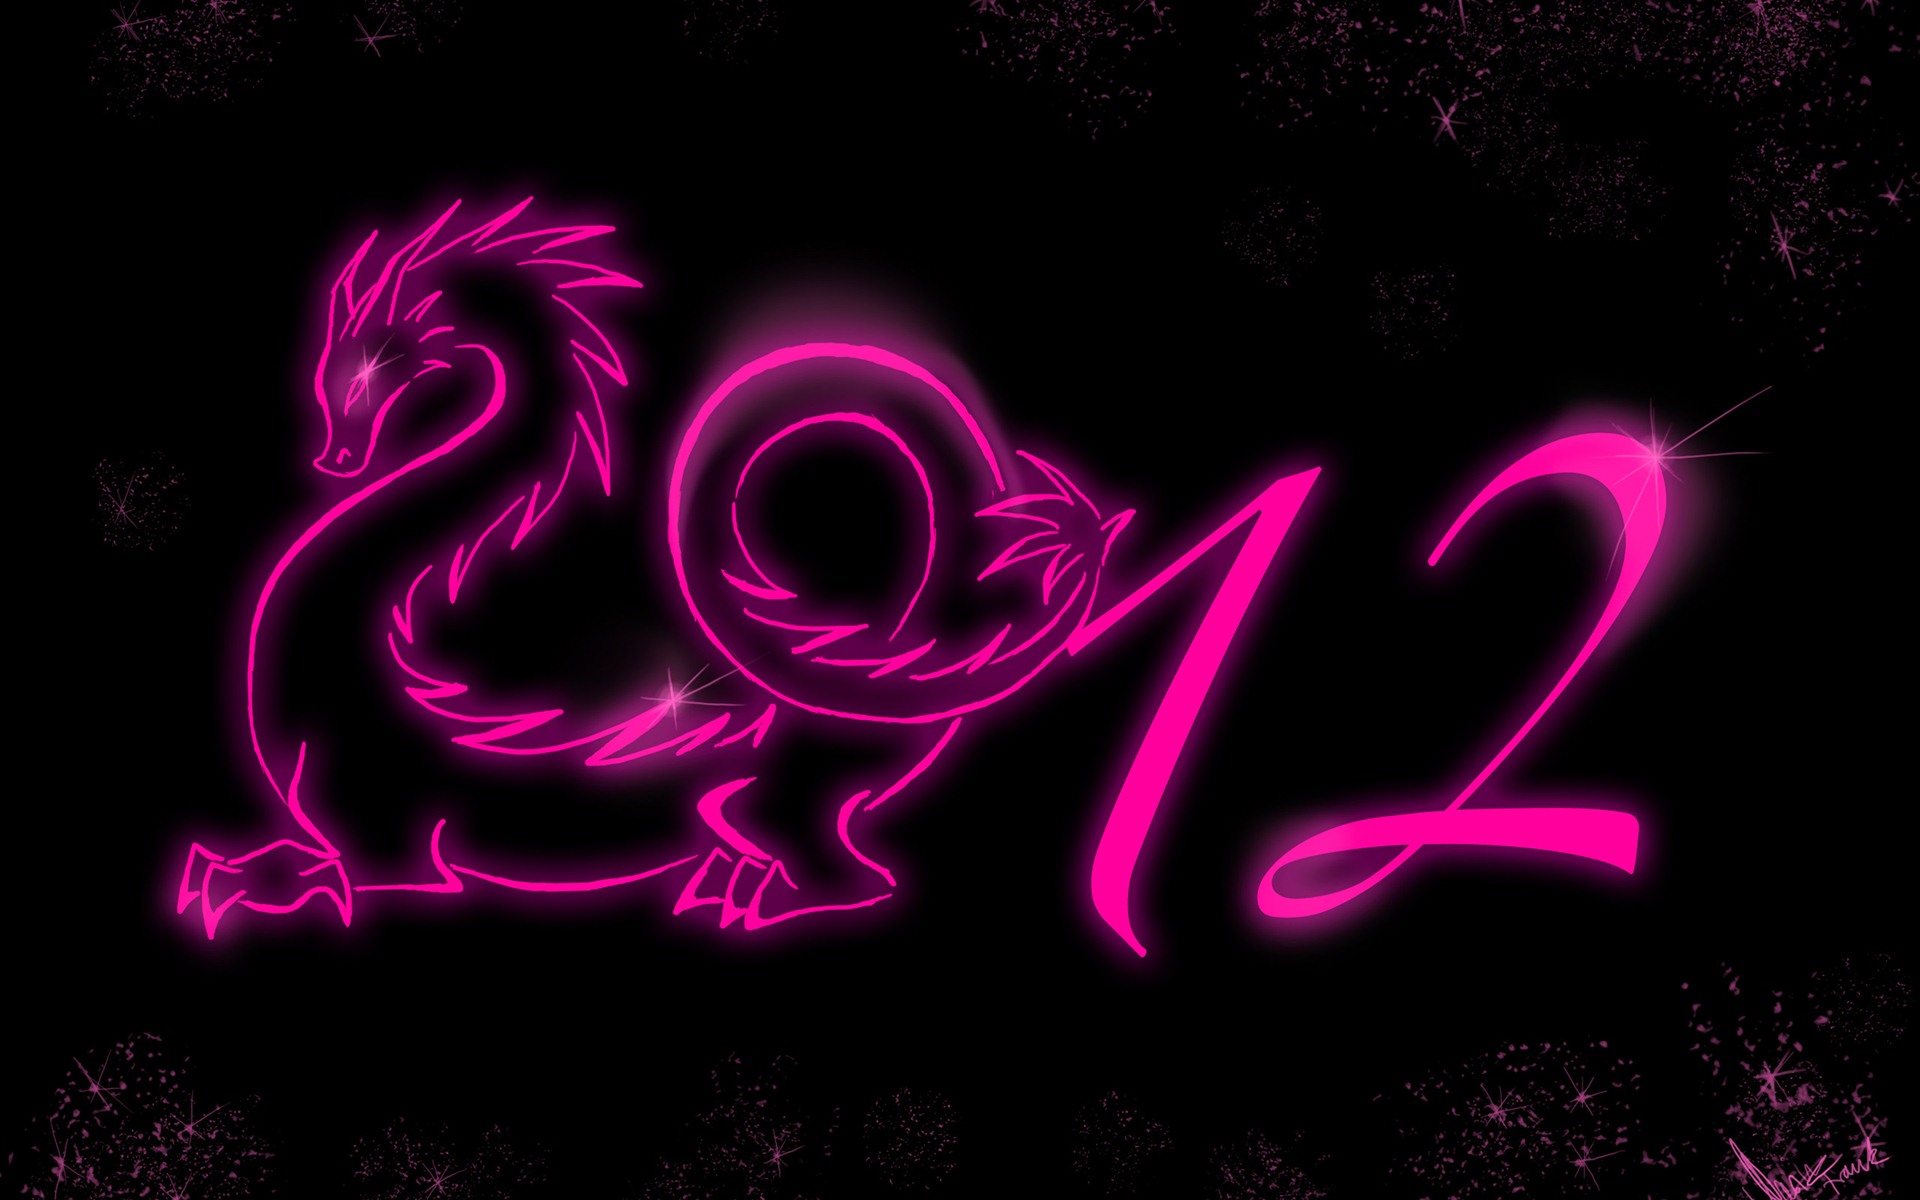 2012 New Year wallpapers (1) #16 - 1920x1200